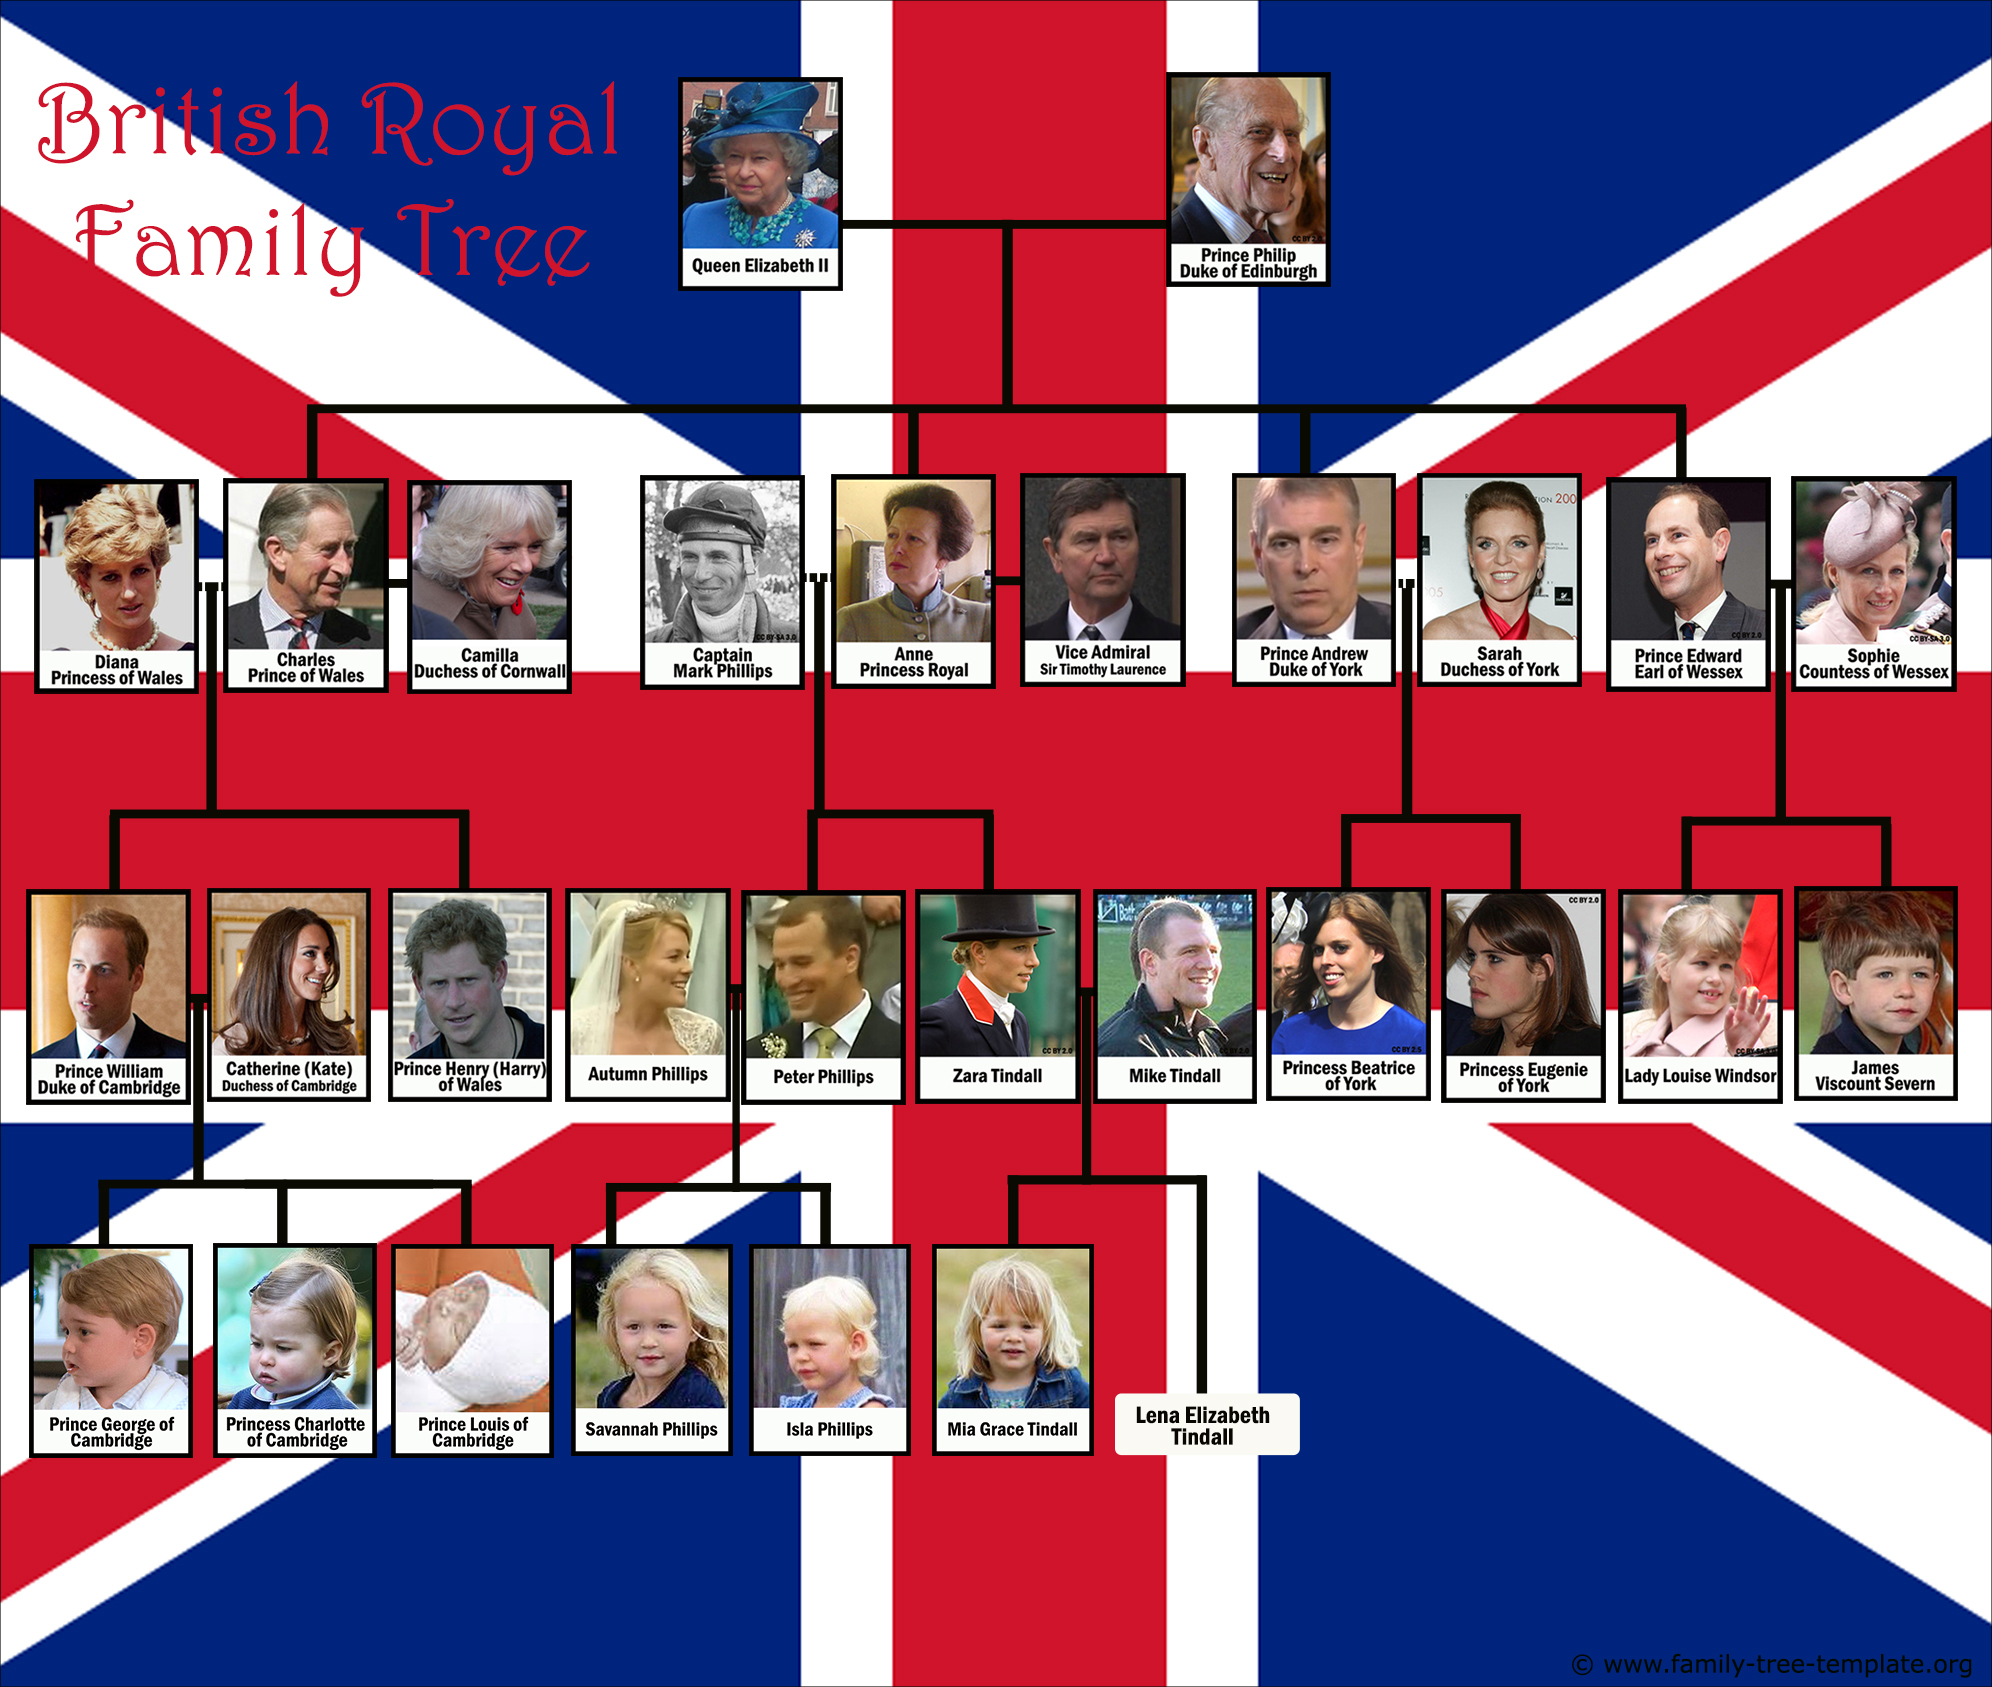 Decorative British royal family tree with Queen Elizabeth II and decendents.